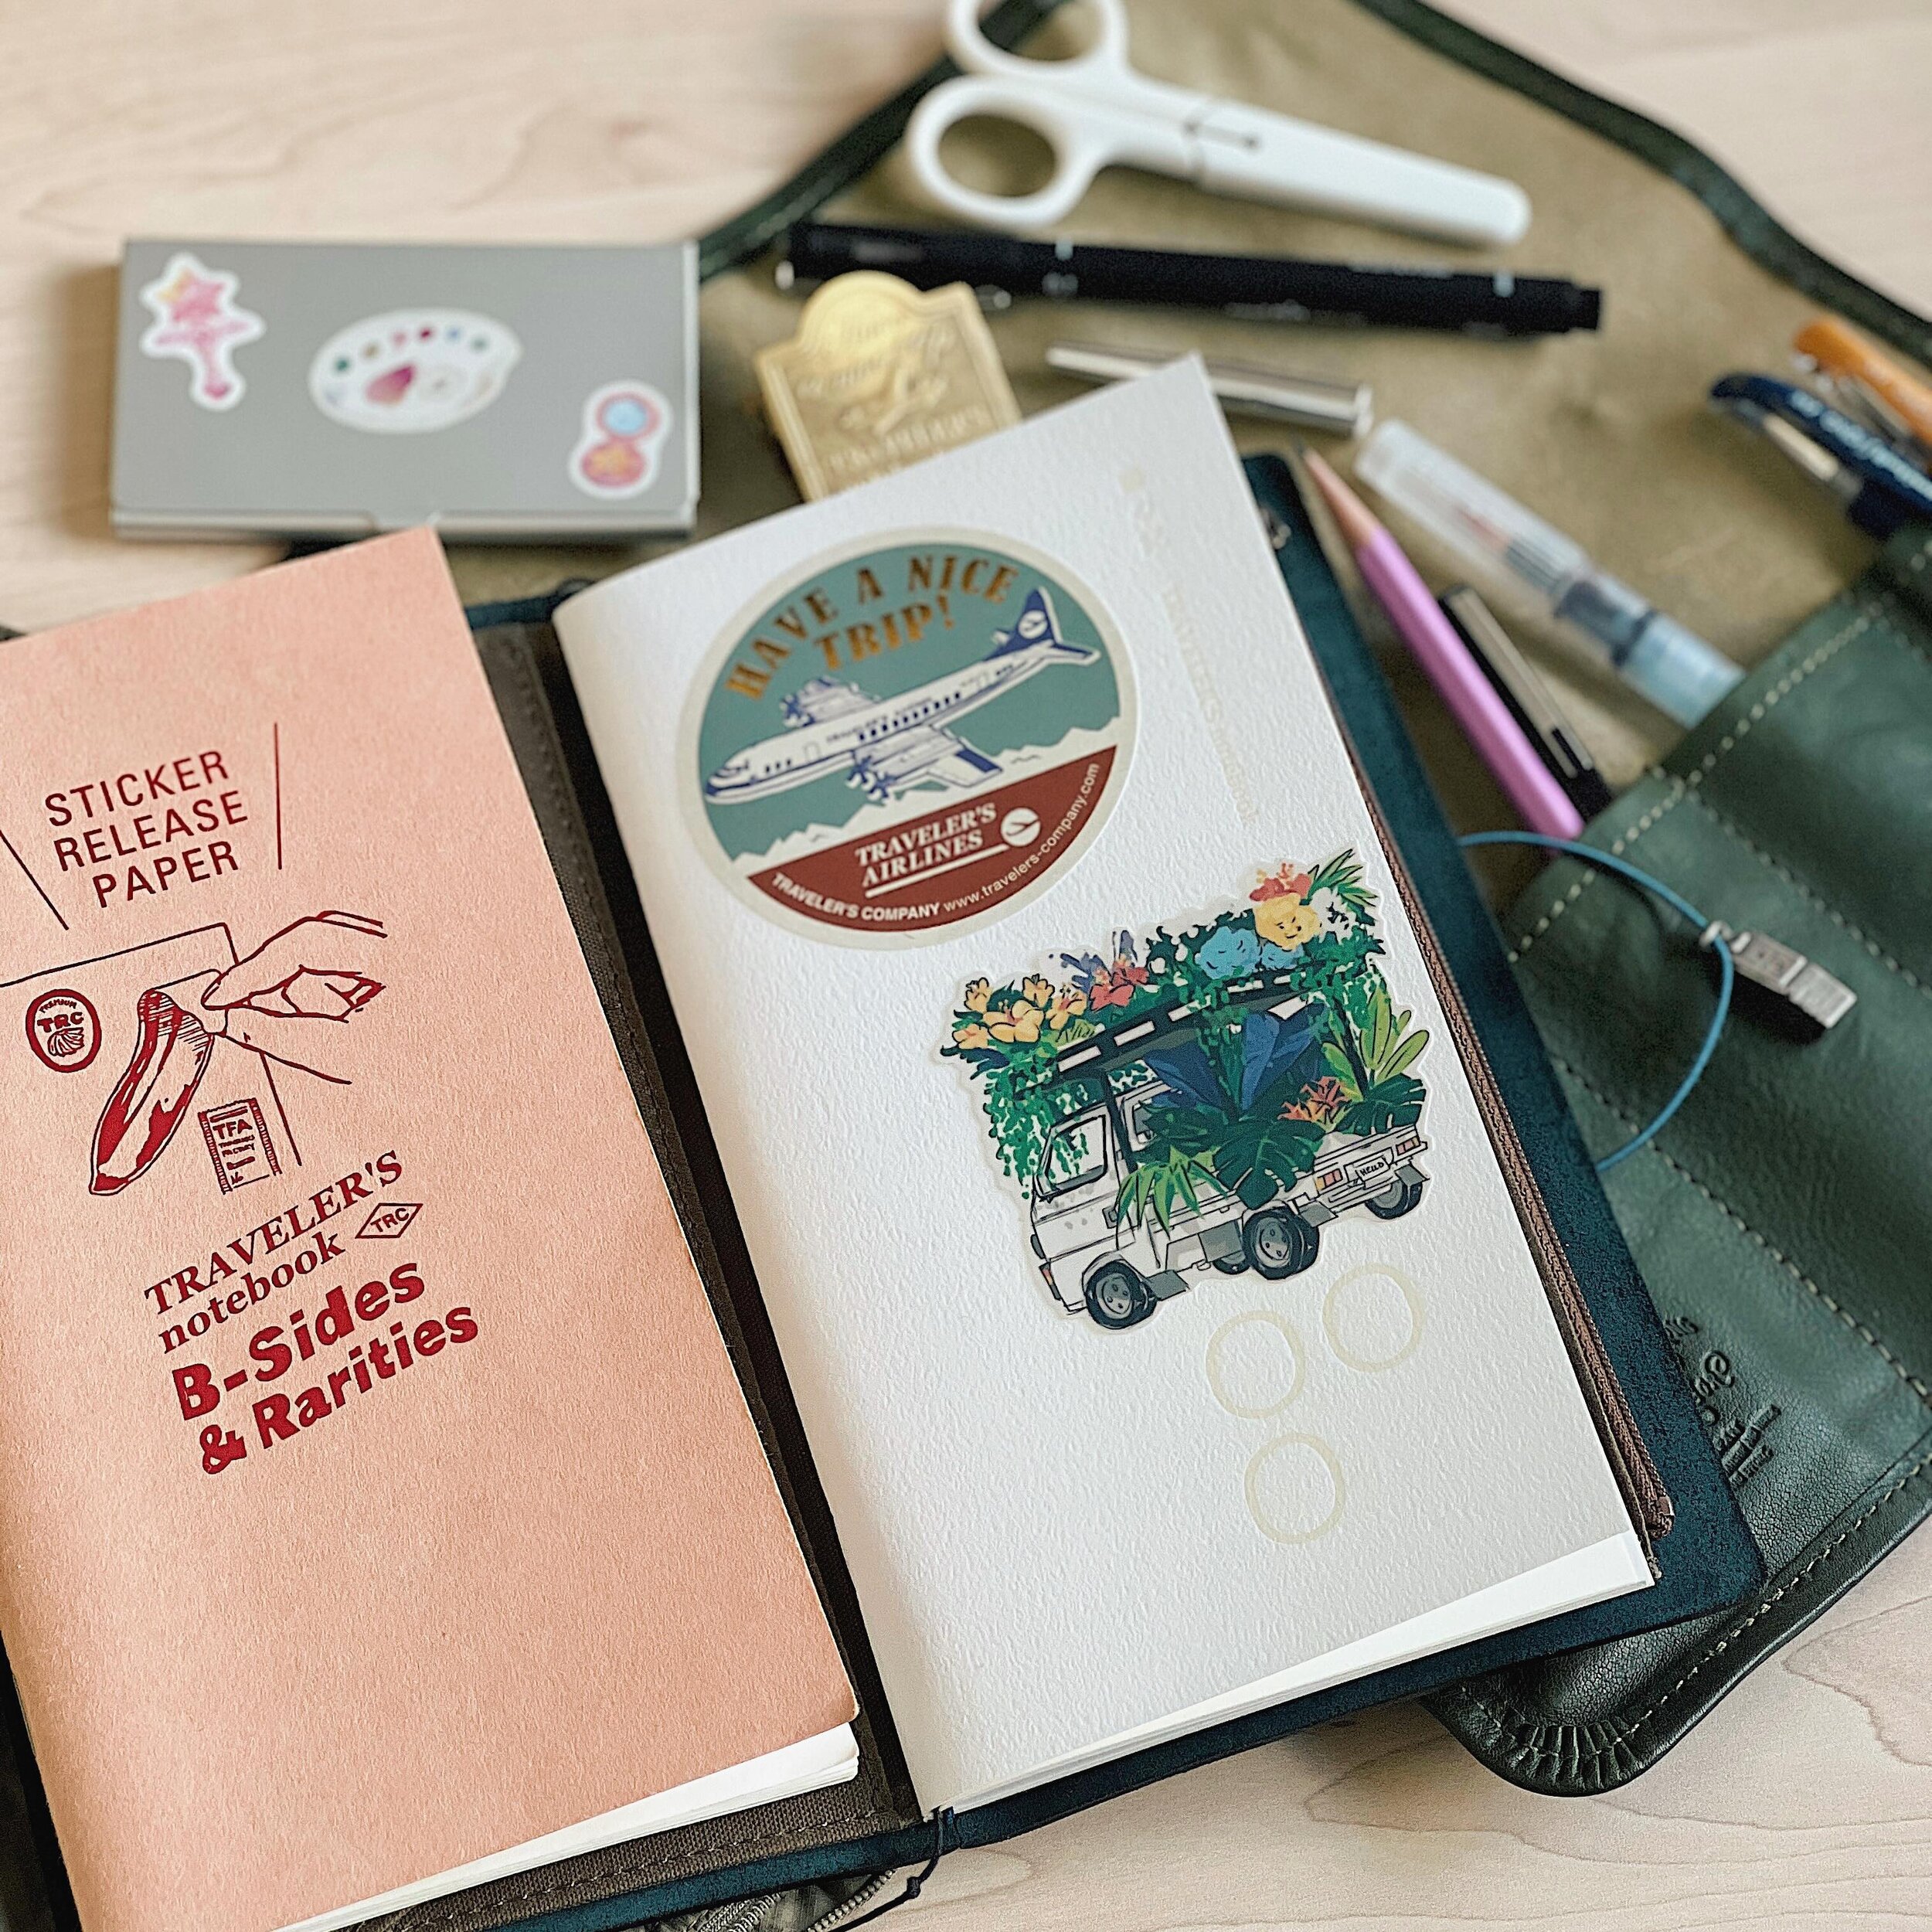 I think I&rsquo;ve managed to simplify my travel journal setup consistently to a traveler&rsquo;s notebook and one other item! This pen roll has been my go-to as of the last few trips. I made a new video about the next travel journal setup - link is 